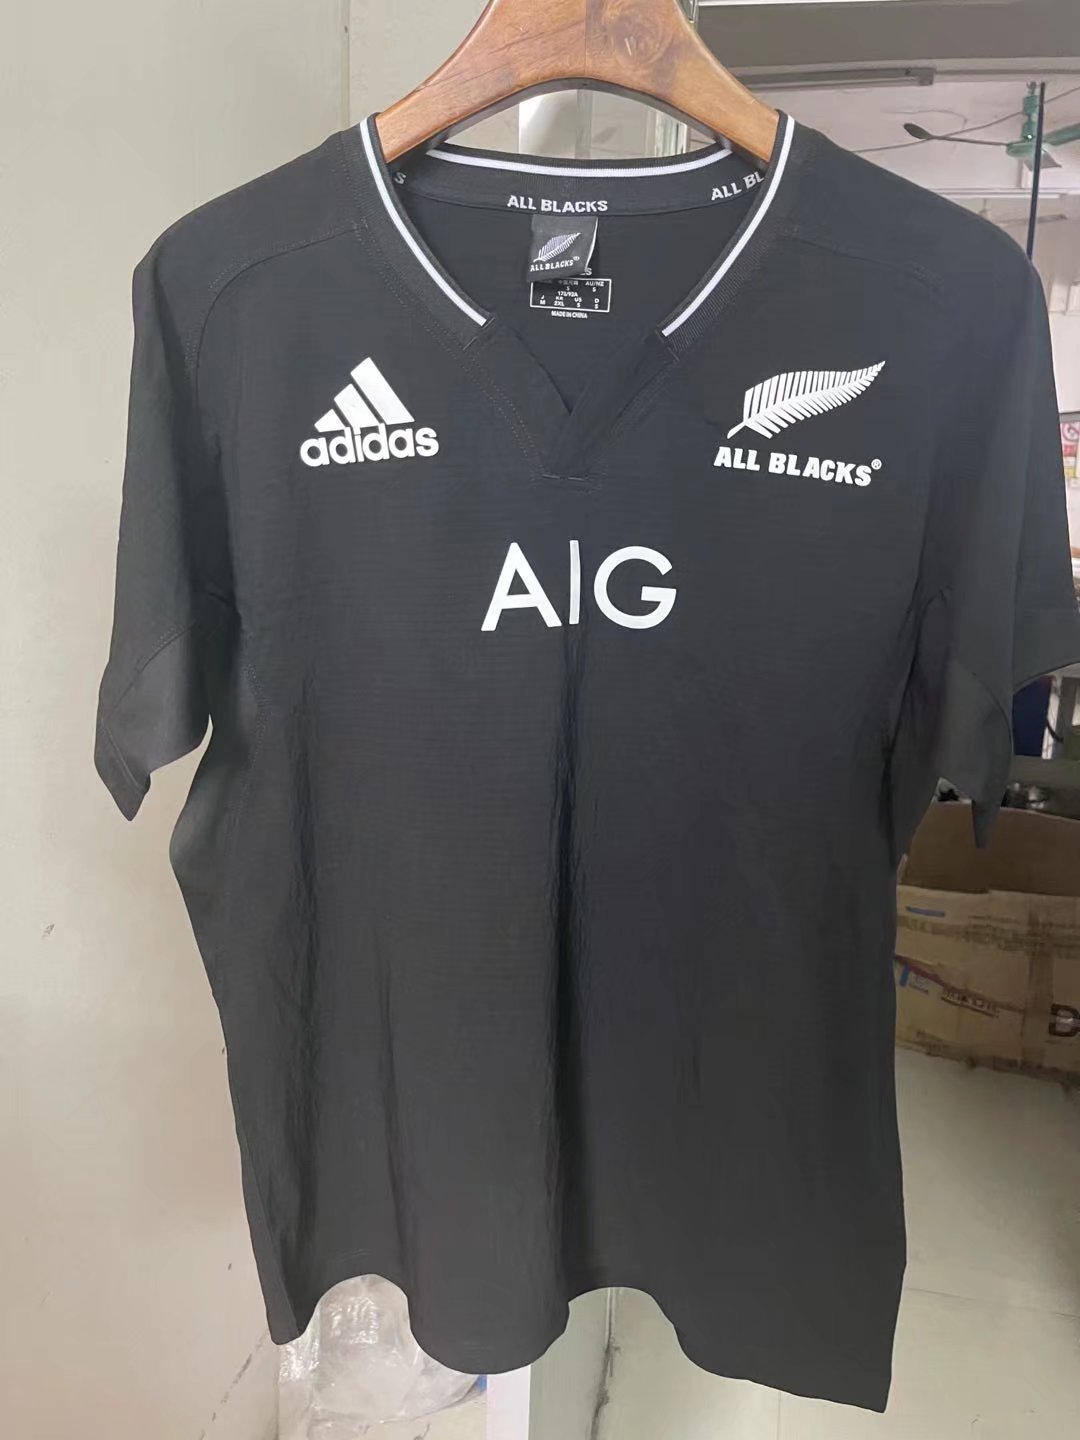 All Blacks Soccer Jersey Replica Rugby Home Mens 2021/22 